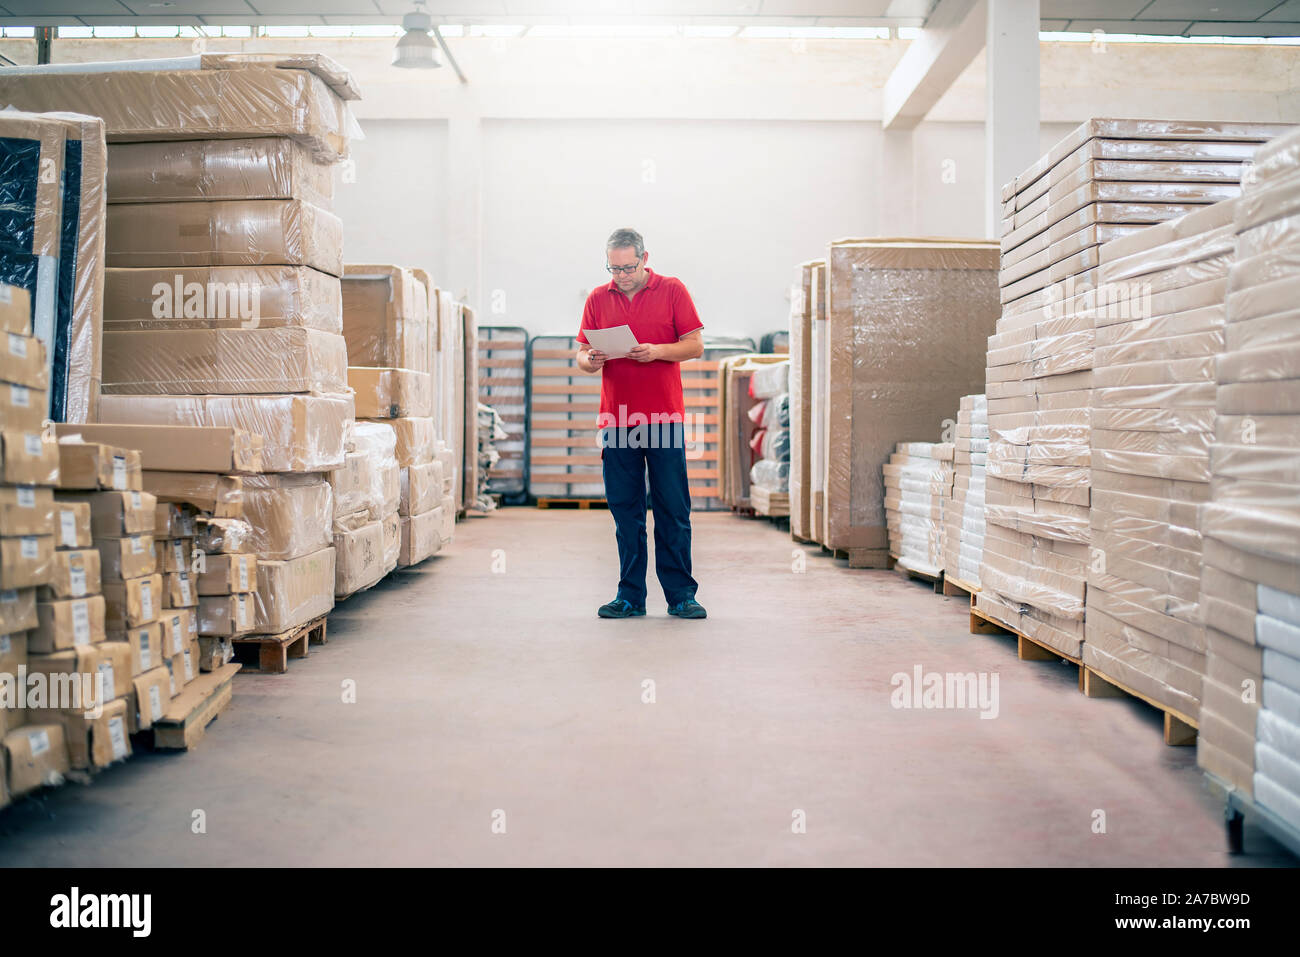 Warehouse employee checking the stock of stored products Stock Photo